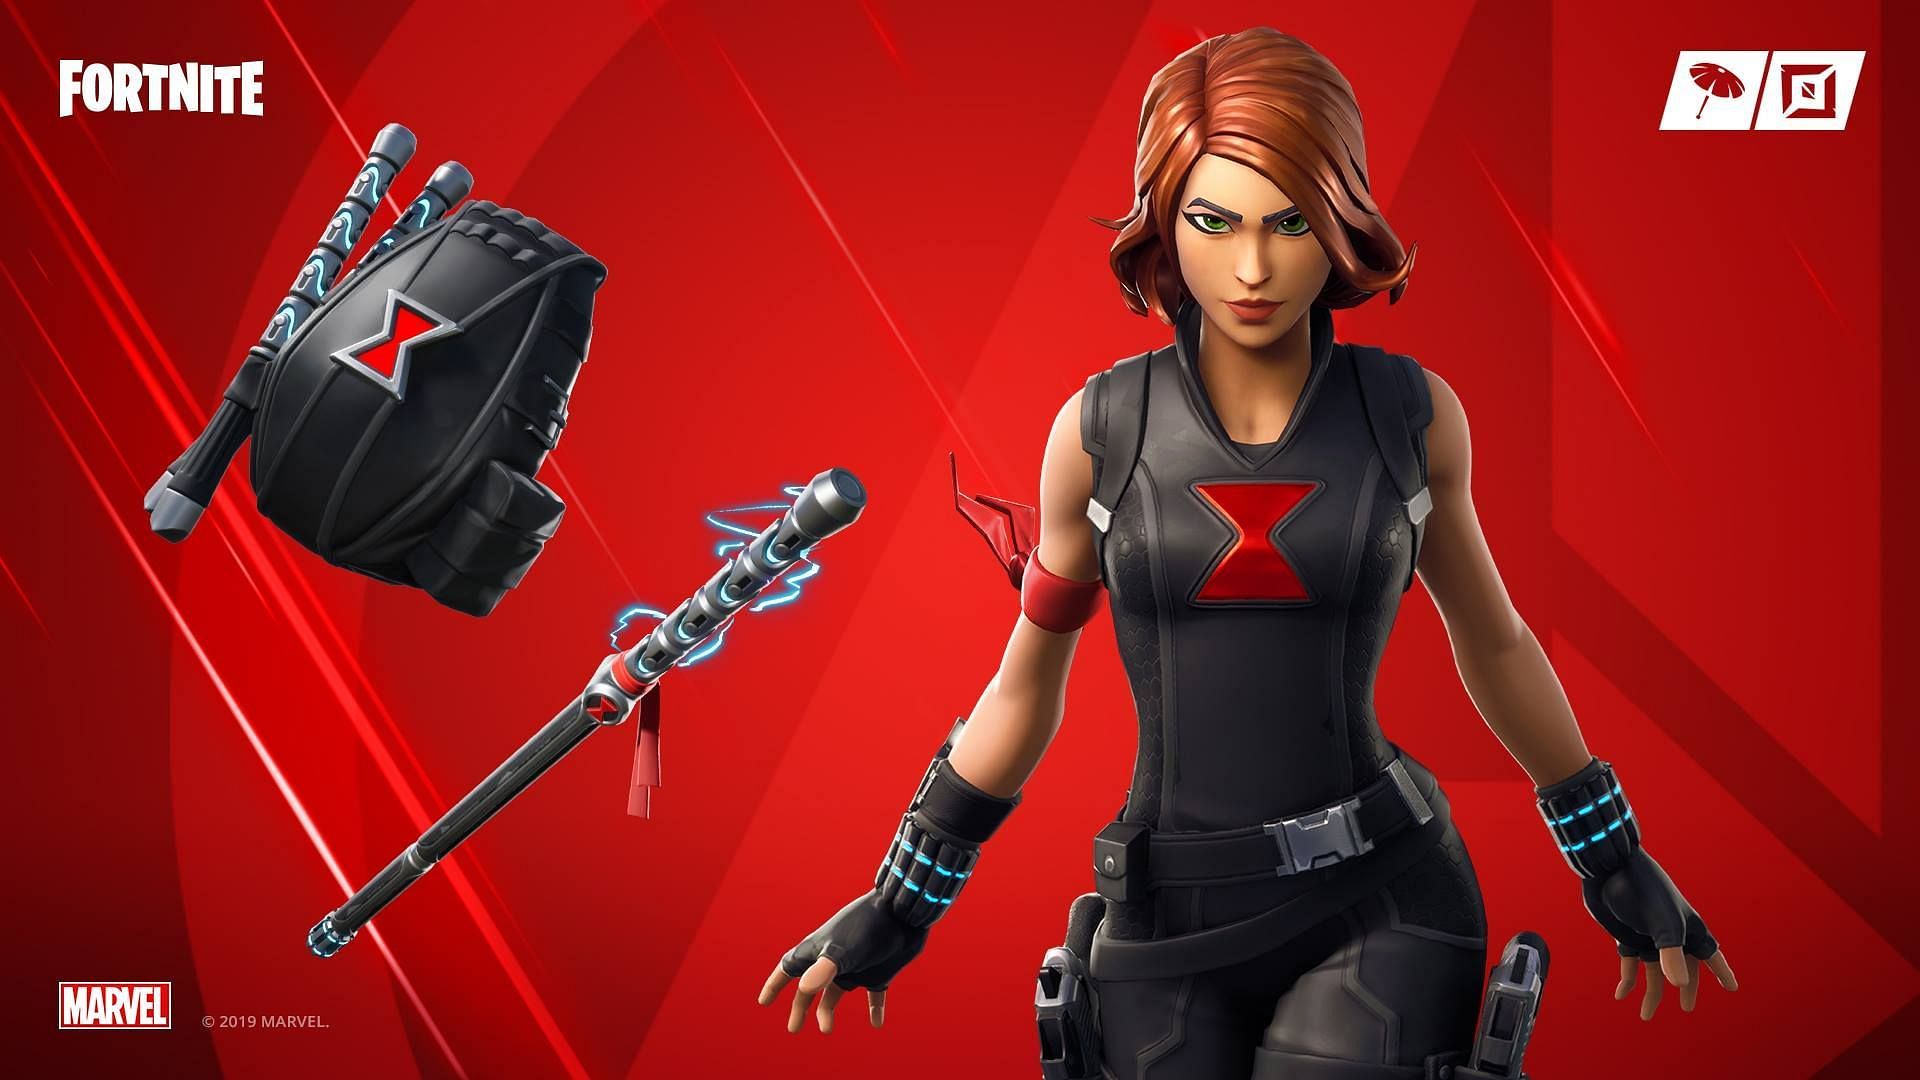 Fortnite Black Widow Outfit unvaulted after four years, community left speechless